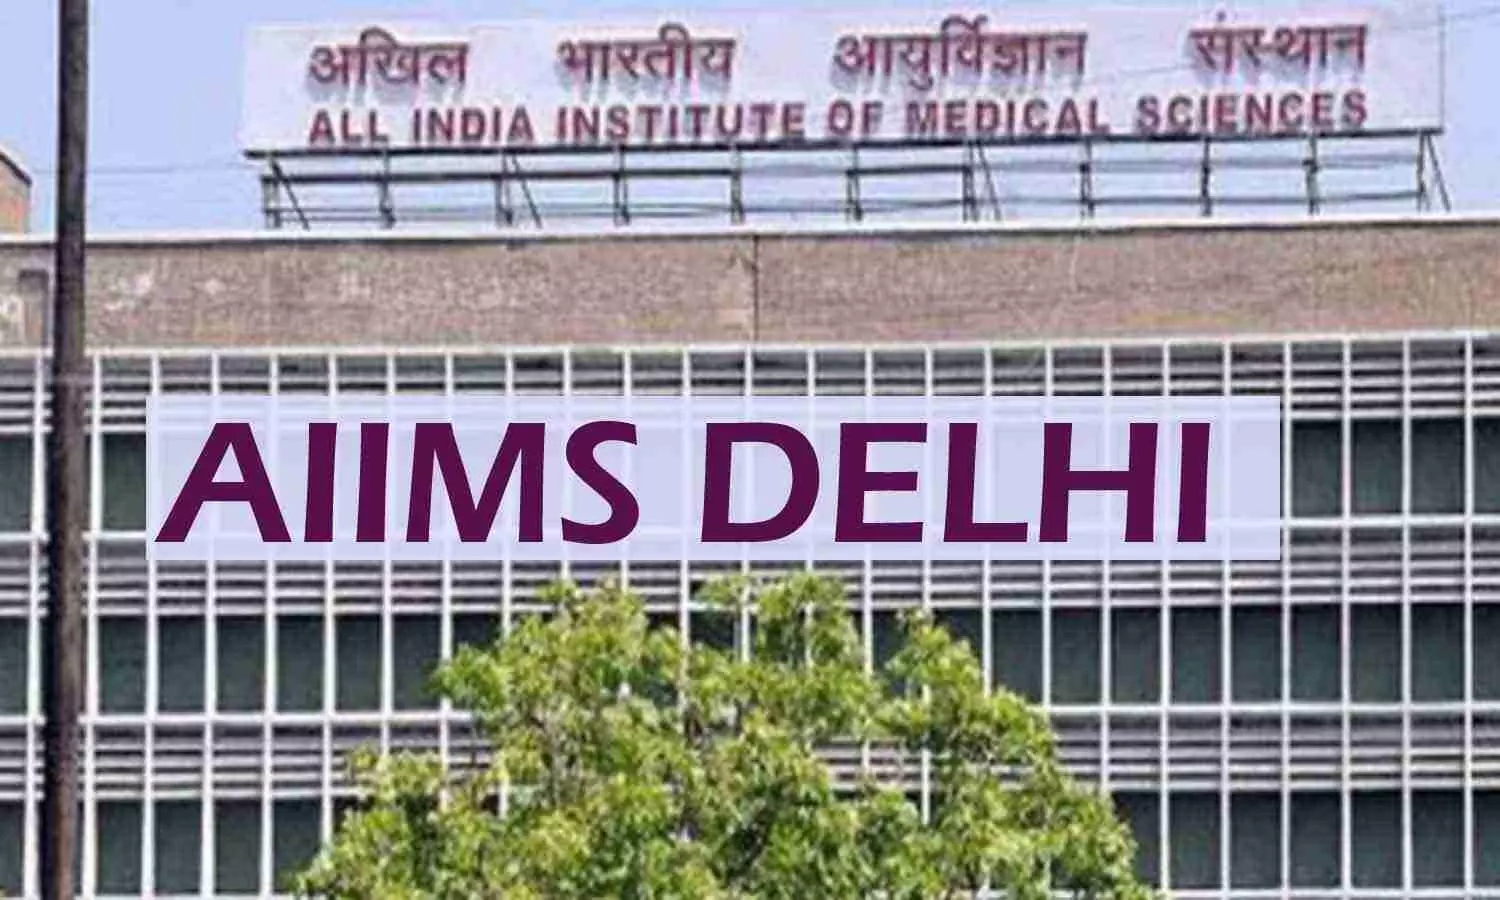 Rise in COVID-19 cases: AIIMS restricts OPD, routine procedures, non essential surgeries